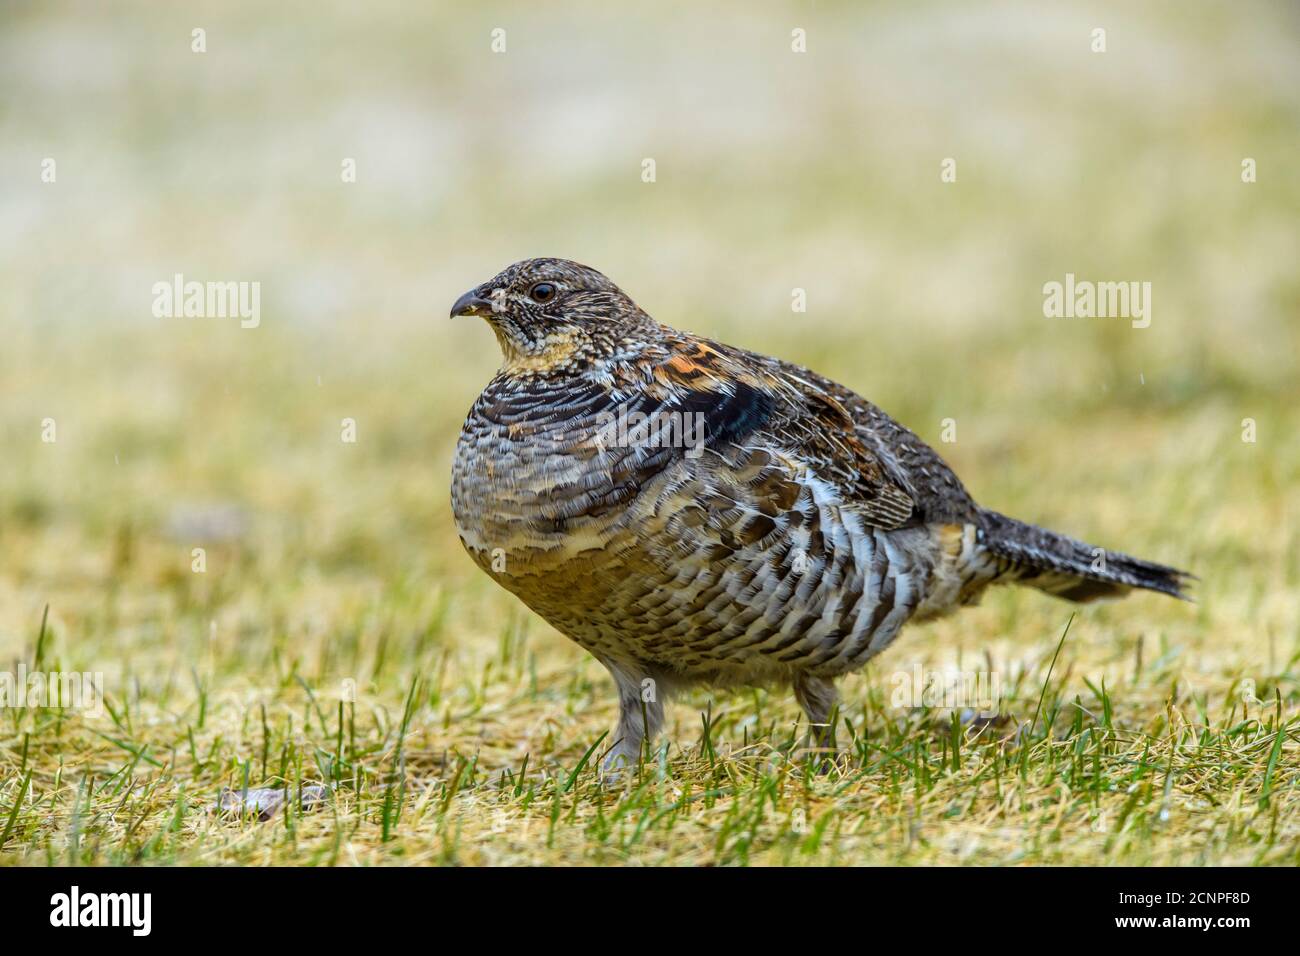 Ruffed grouse (Bonassa umbellus) foraging on an early spring lawn, Greater Sudbury, Ontario, Canada Stock Photo